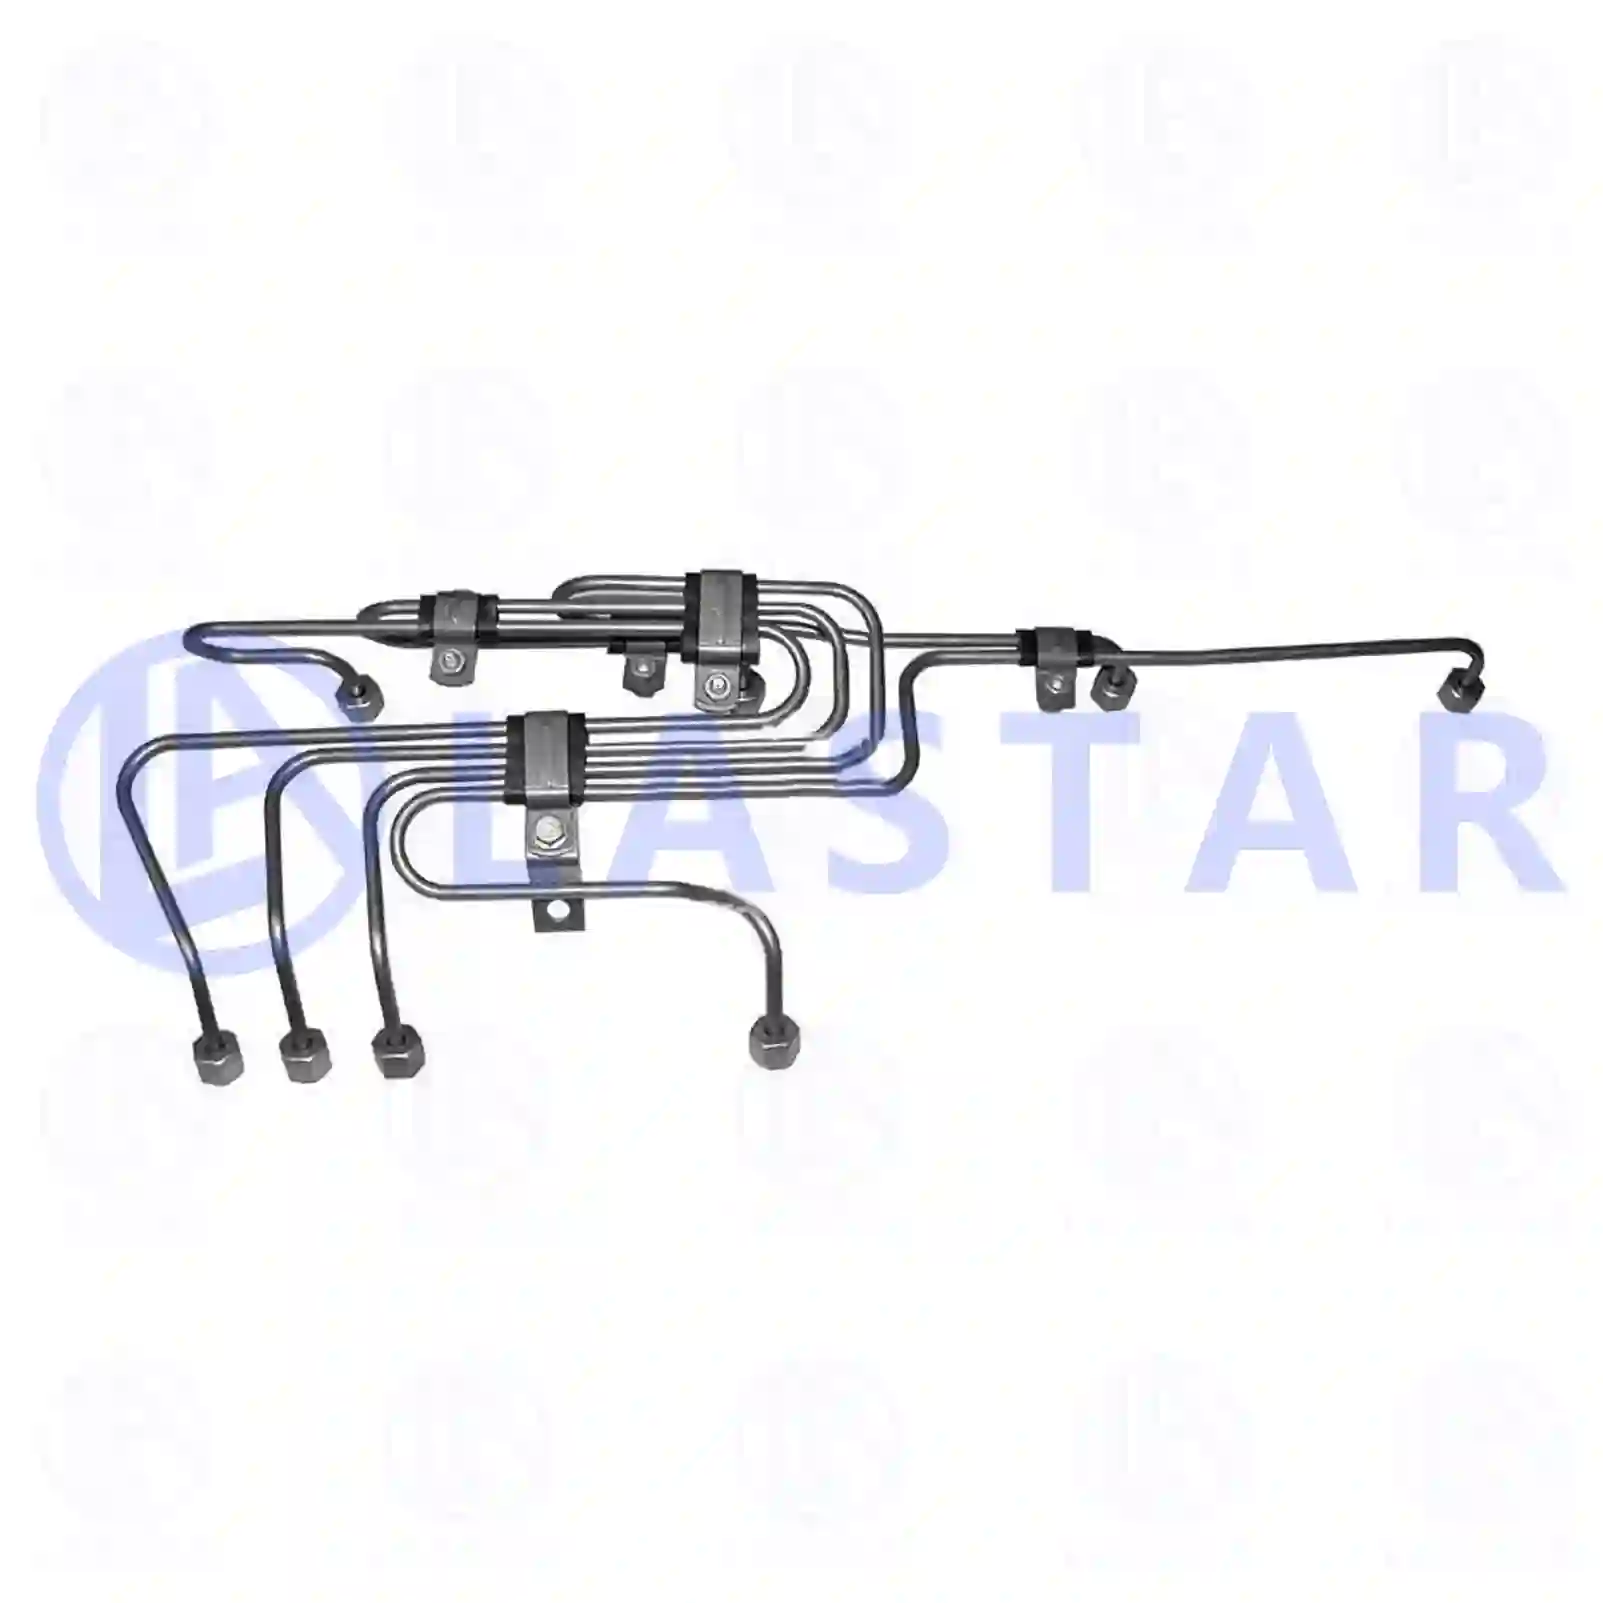 Injection line kit, 77724068, 4420706033, 4420707933, 4420708333 ||  77724068 Lastar Spare Part | Truck Spare Parts, Auotomotive Spare Parts Injection line kit, 77724068, 4420706033, 4420707933, 4420708333 ||  77724068 Lastar Spare Part | Truck Spare Parts, Auotomotive Spare Parts